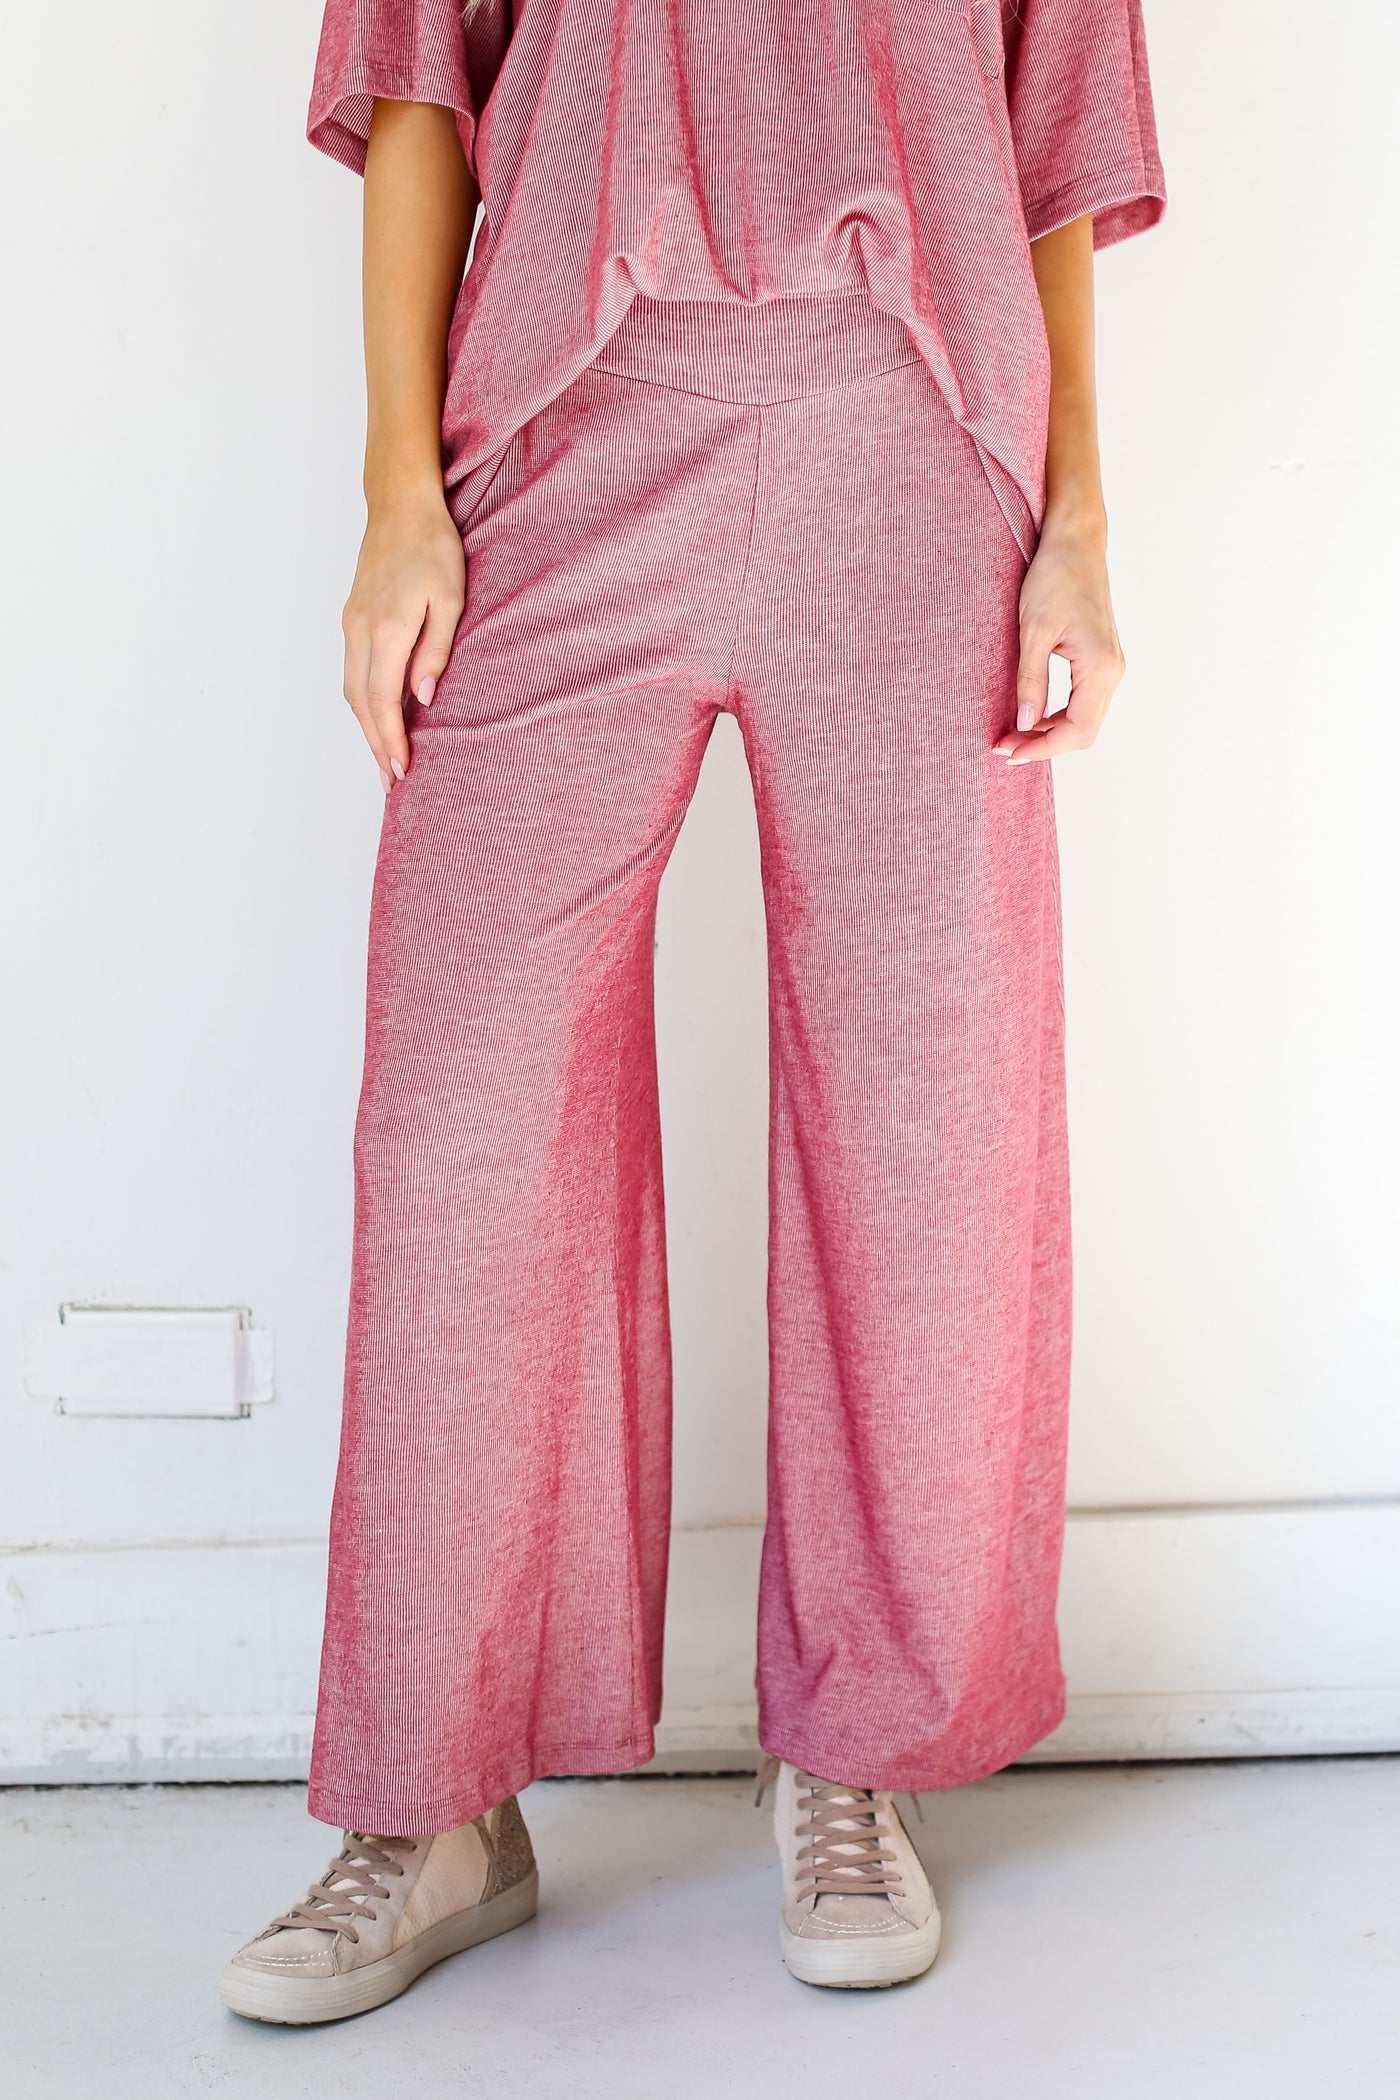 red Wide Leg Pants close up